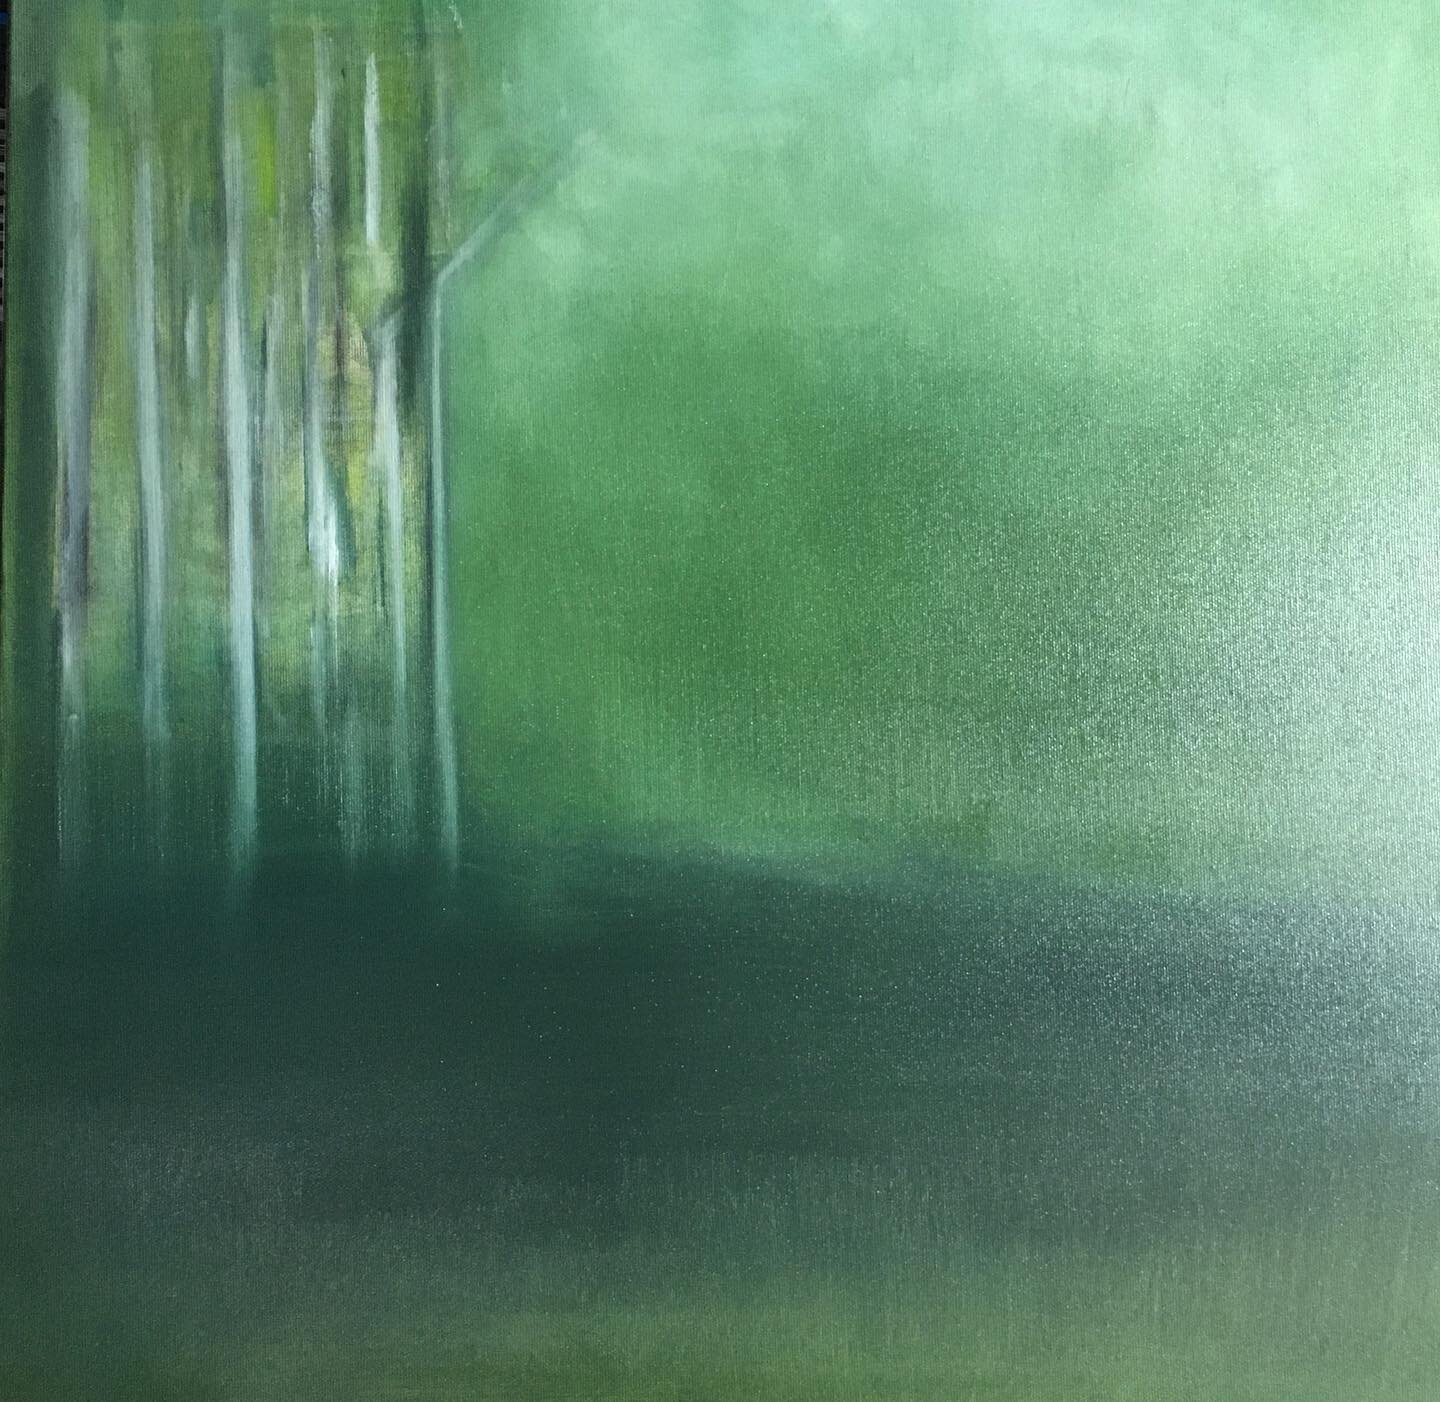 WALKING IN THE WOODS 
Oil on canvas. 60x60cm. 
Inspired by walking in the woods near Stourhead and Alfreds Tower. More on my website: 
www.louise-holgate.com
#buyartonline
#abstractmag  #highgateart  #janenewberydulwich #chelseaartsclub #affordablear